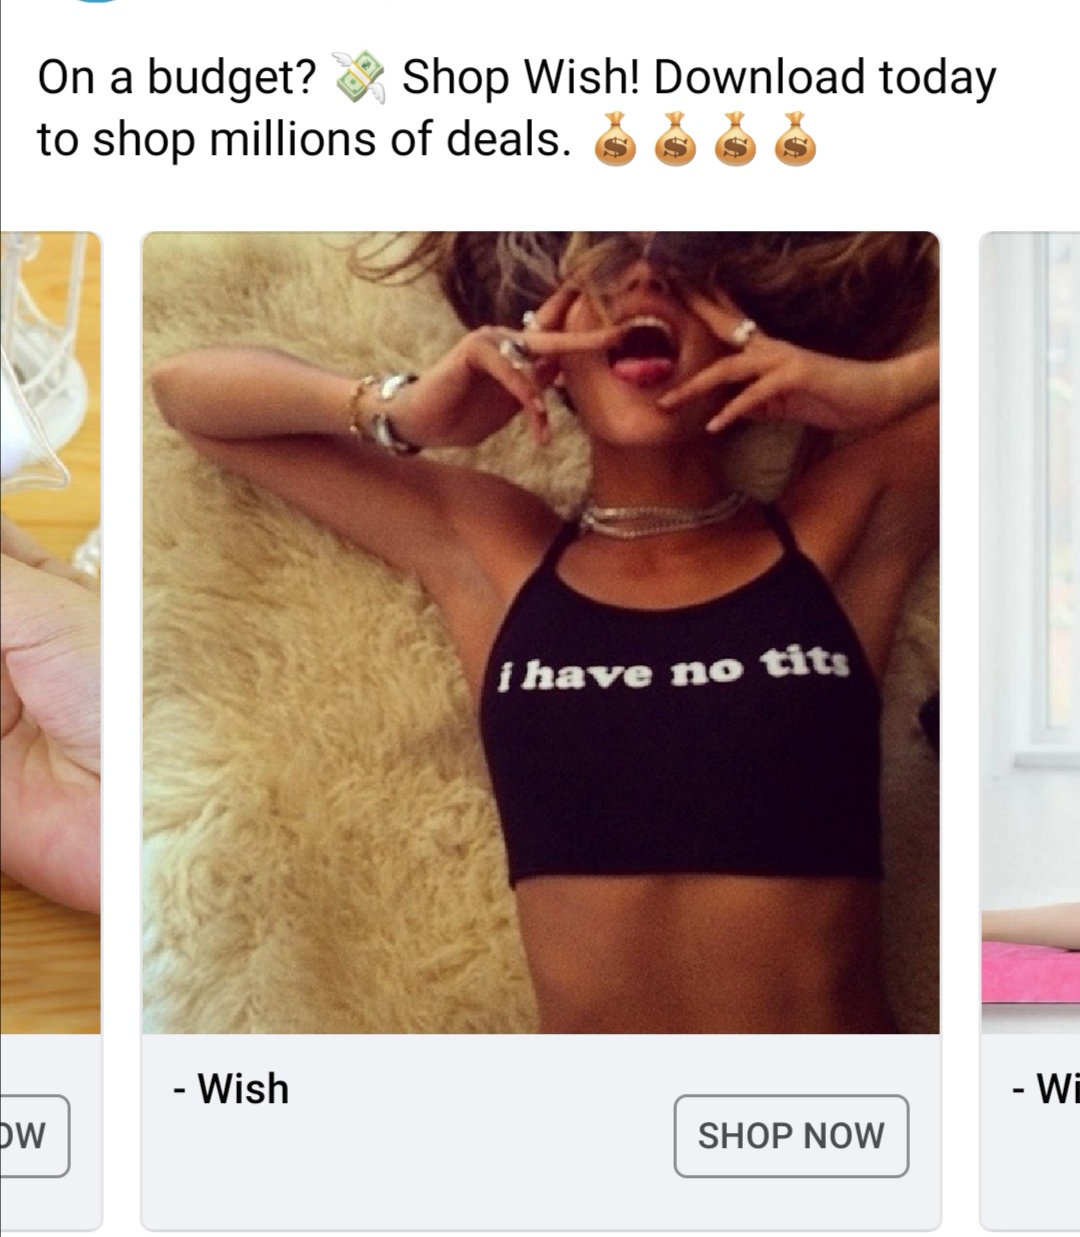 have no tits crop top - On a budget? Shop Wish! Download today to shop millions of deals. $ $ i have no tits Wish We Dw Shop Now